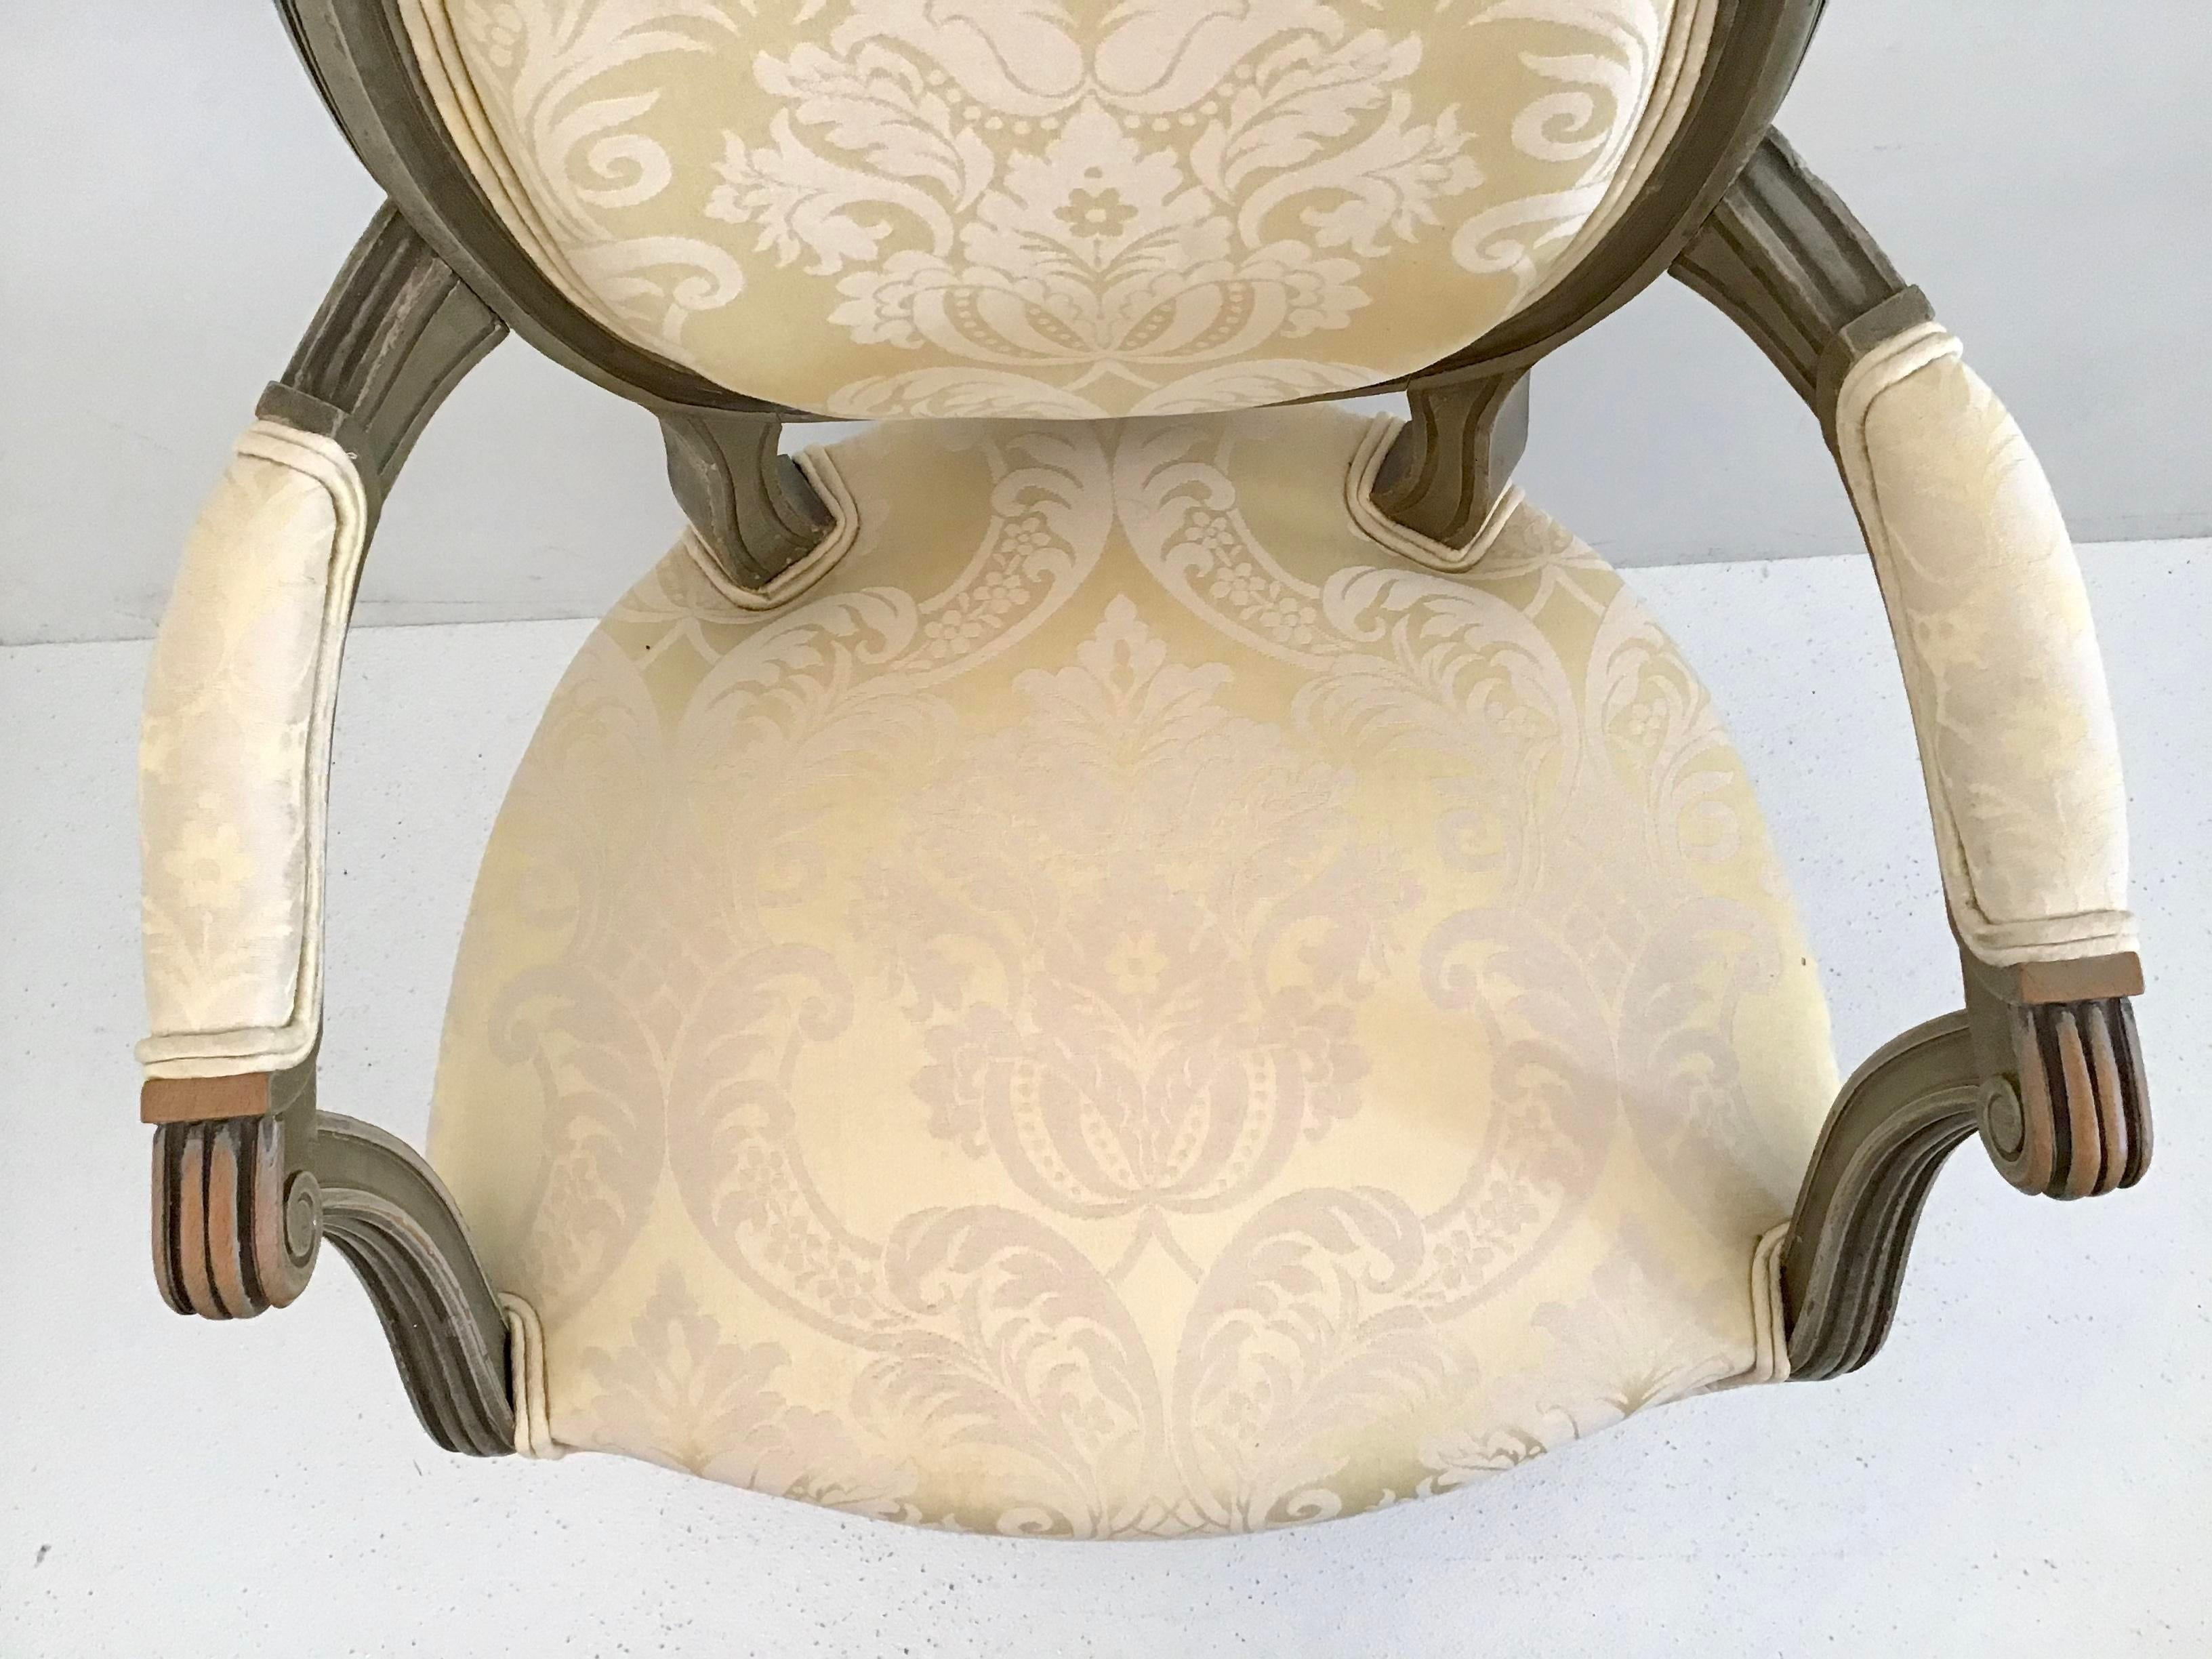 French Bronze Louis XVI Fauteuils in New Yellow Damask Upholstery, a Pair For Sale 4